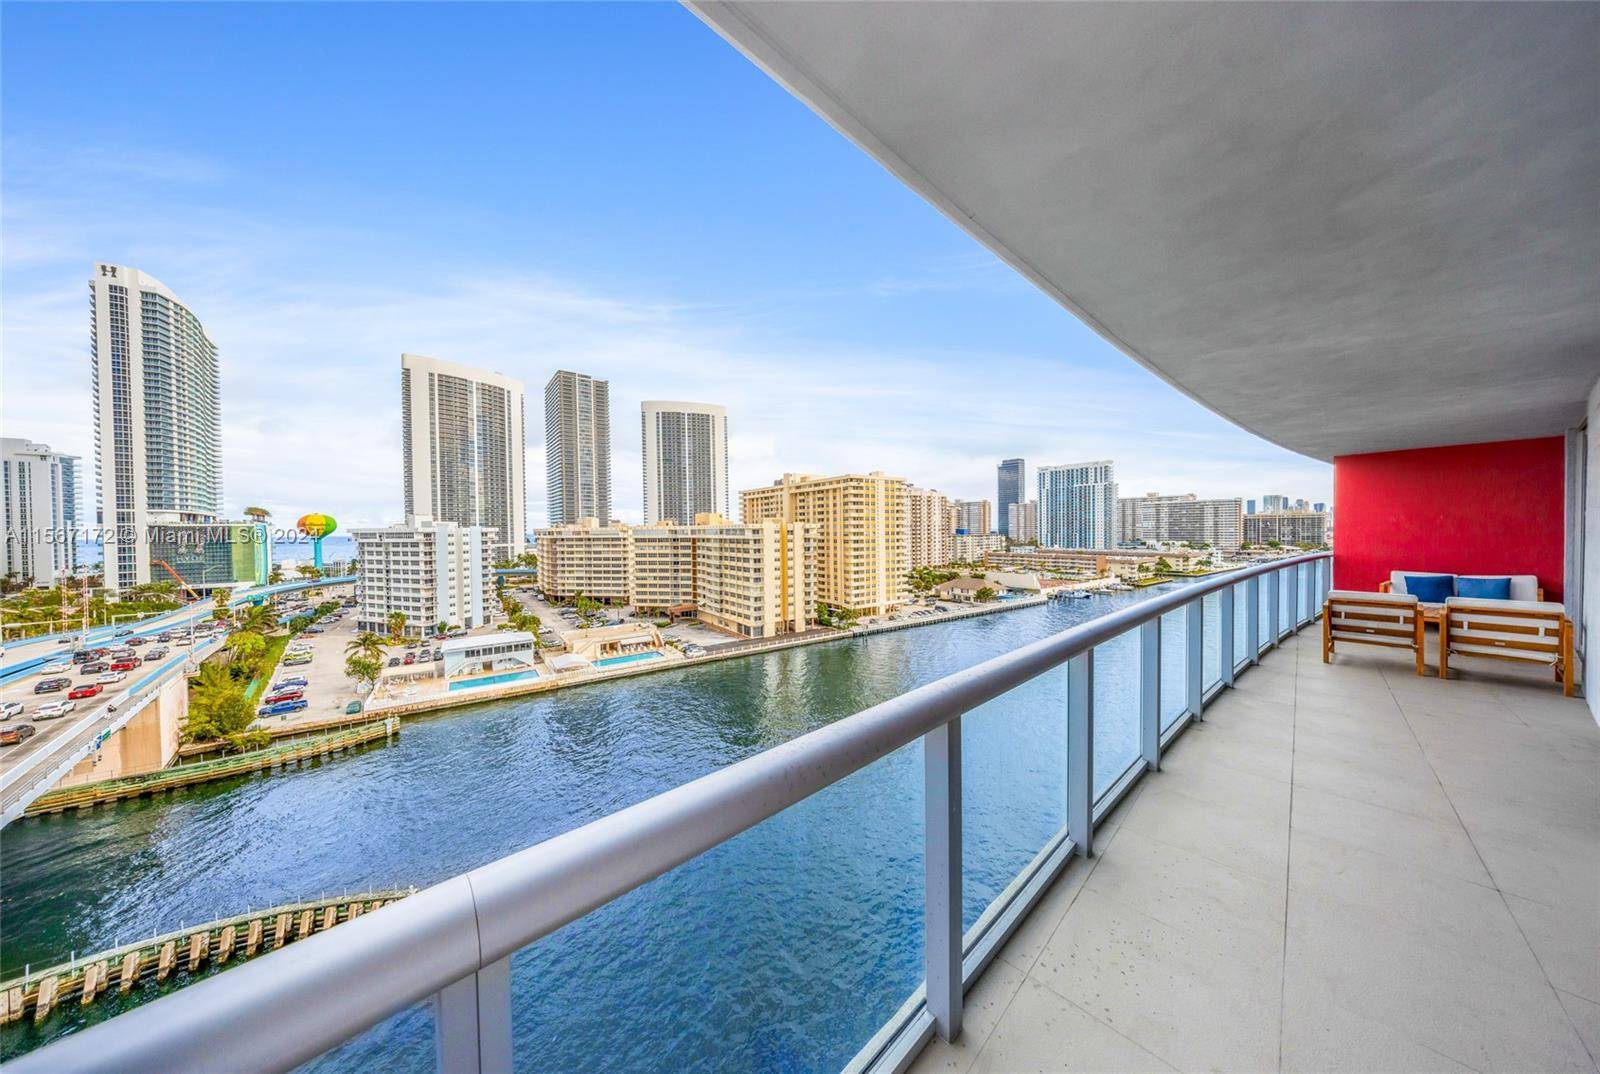 Luxury corner unit with stunning ocean, intracoastal, and city views.